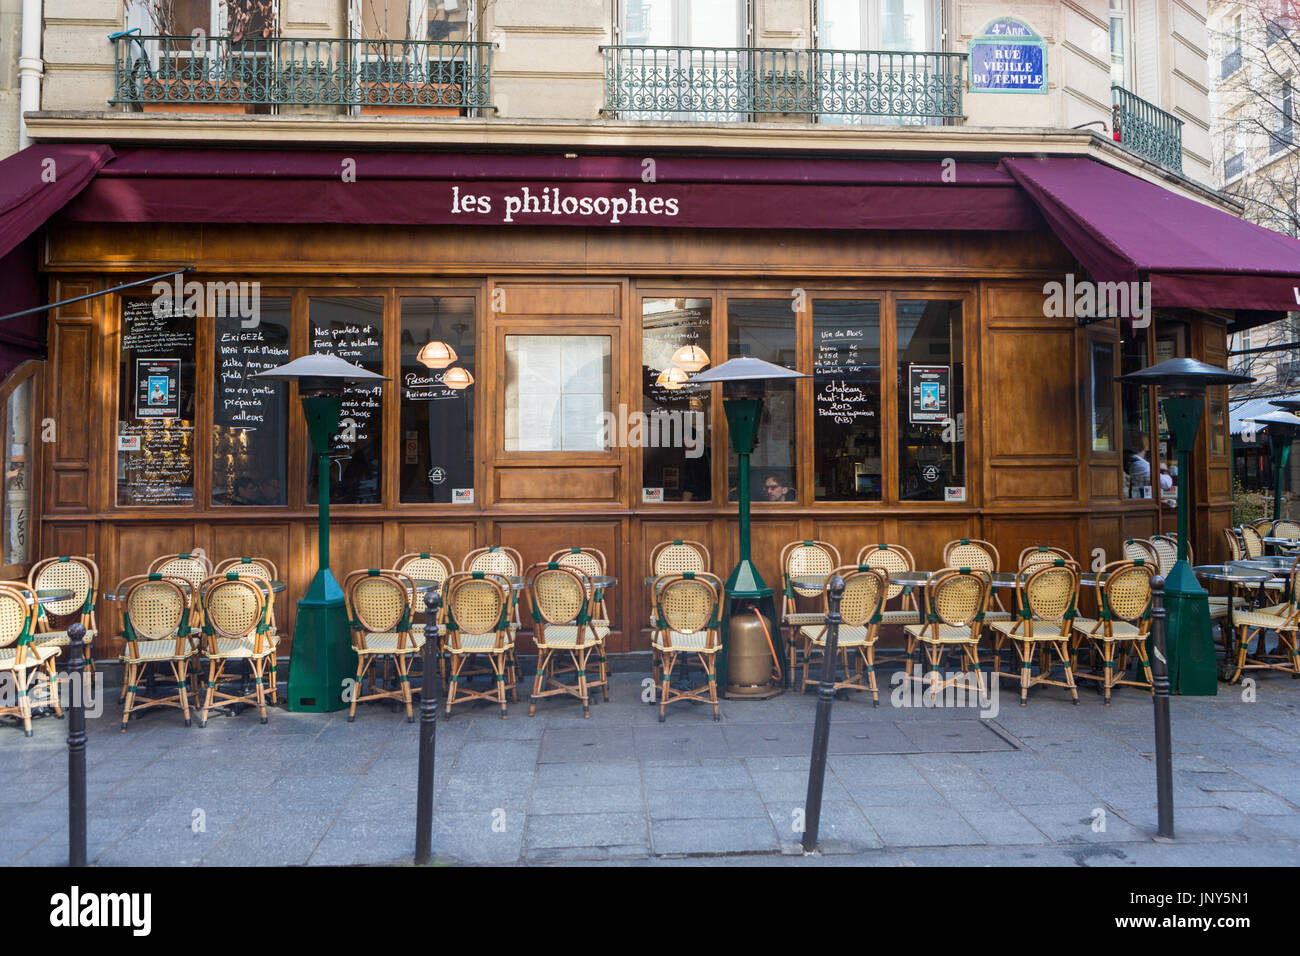 Paris, France - February 29, 2016: Les Philosophes cafe on rue Vieille du Temple in the Marais, Paris, France in the early morning at opening time. Stock Photo